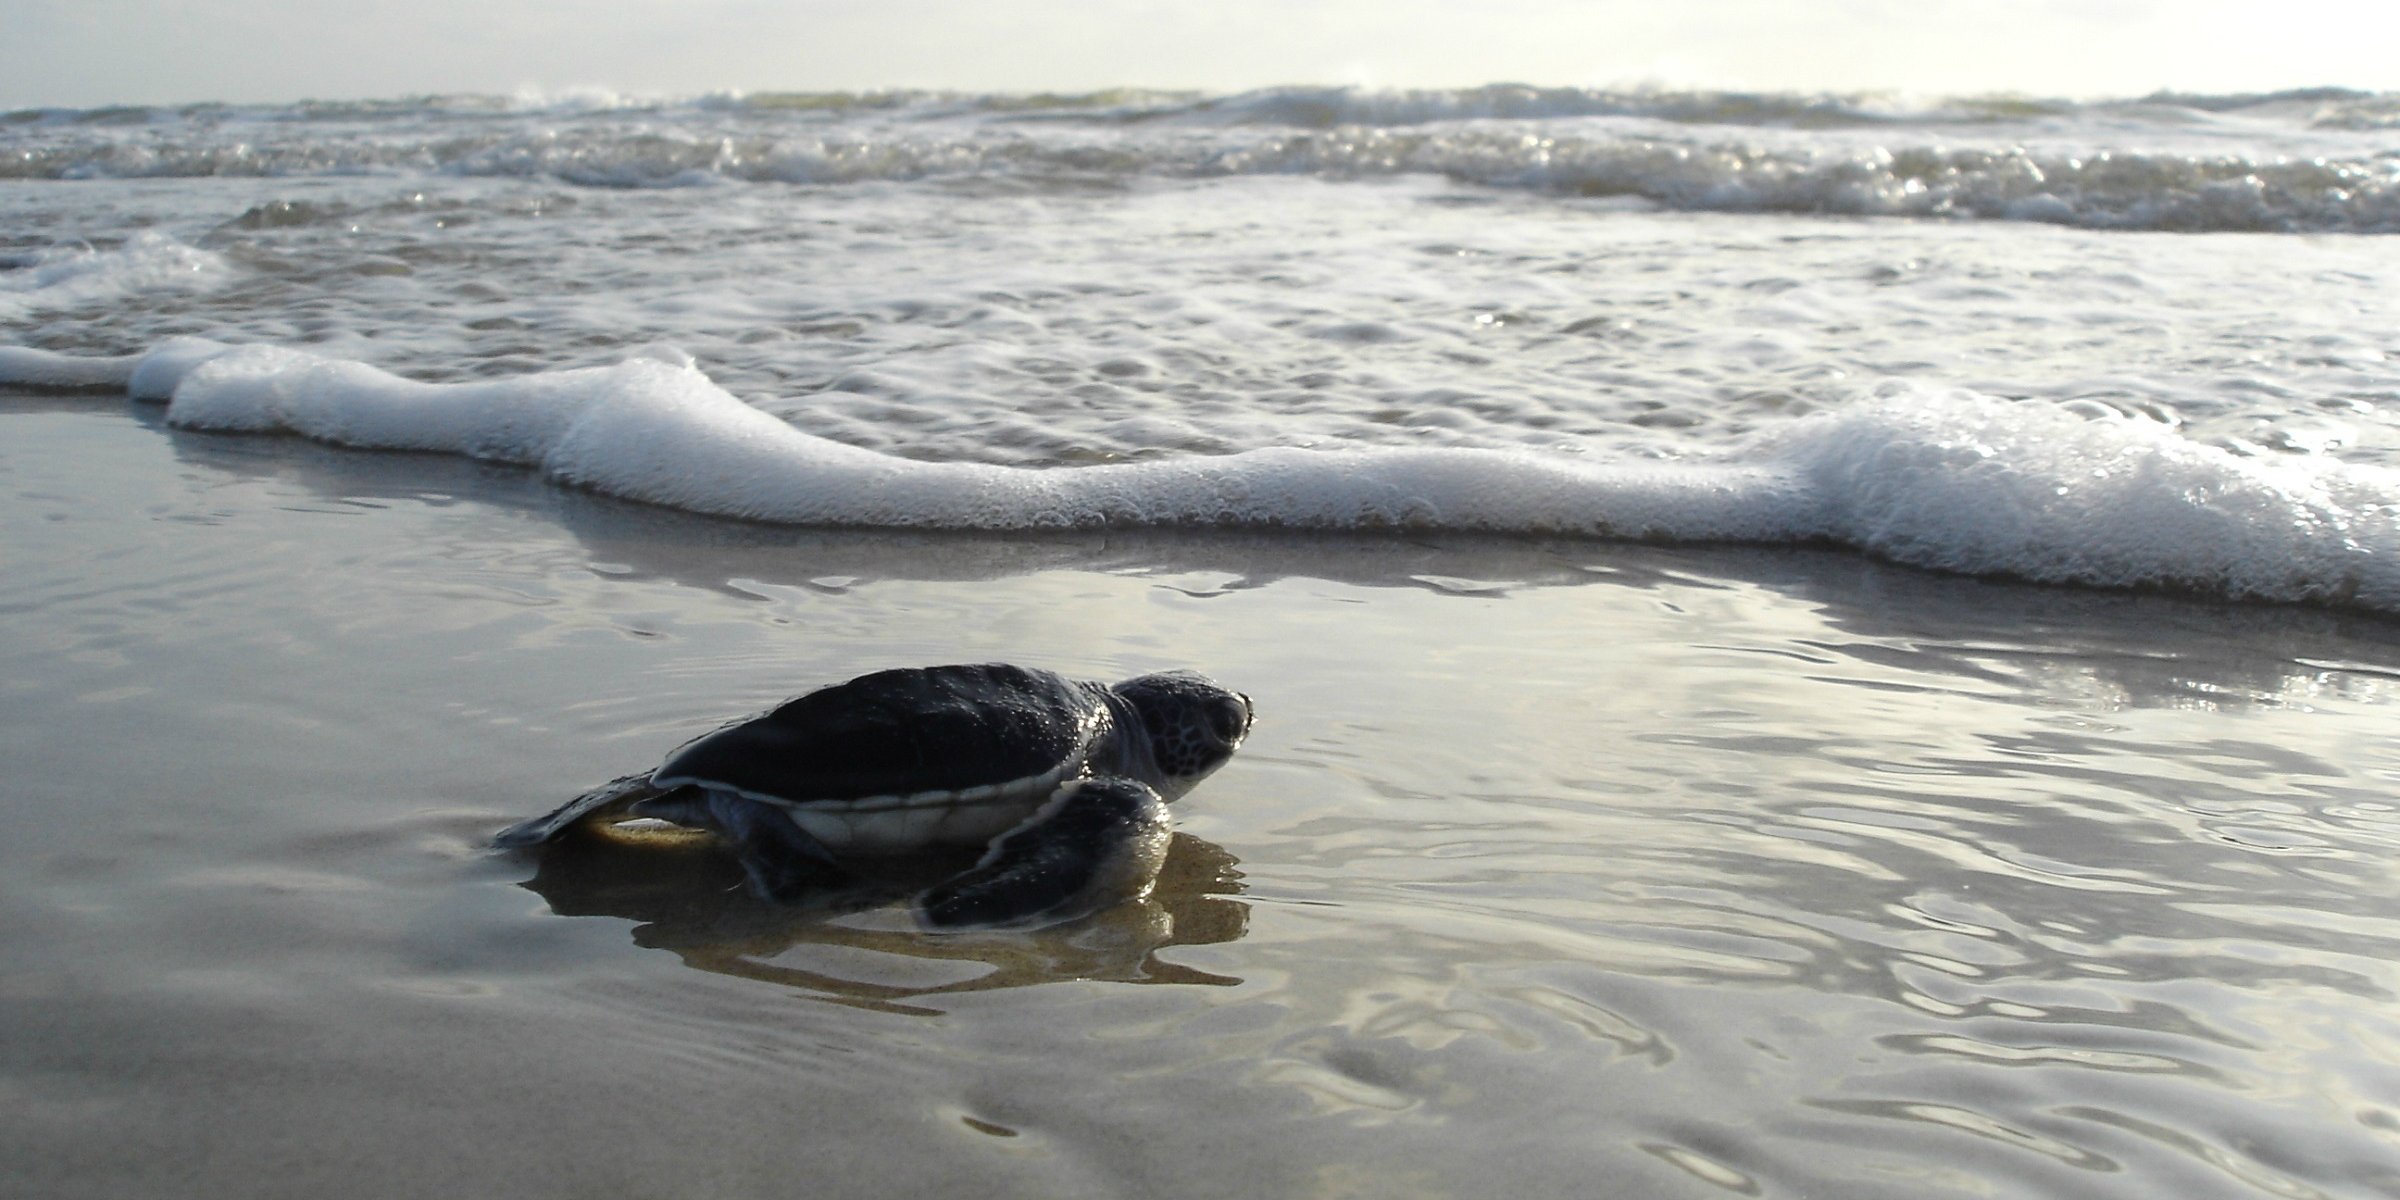 An endangered green sea turtle hatchling races to the ocean in Seychelles, where wildlife conservation never stops.